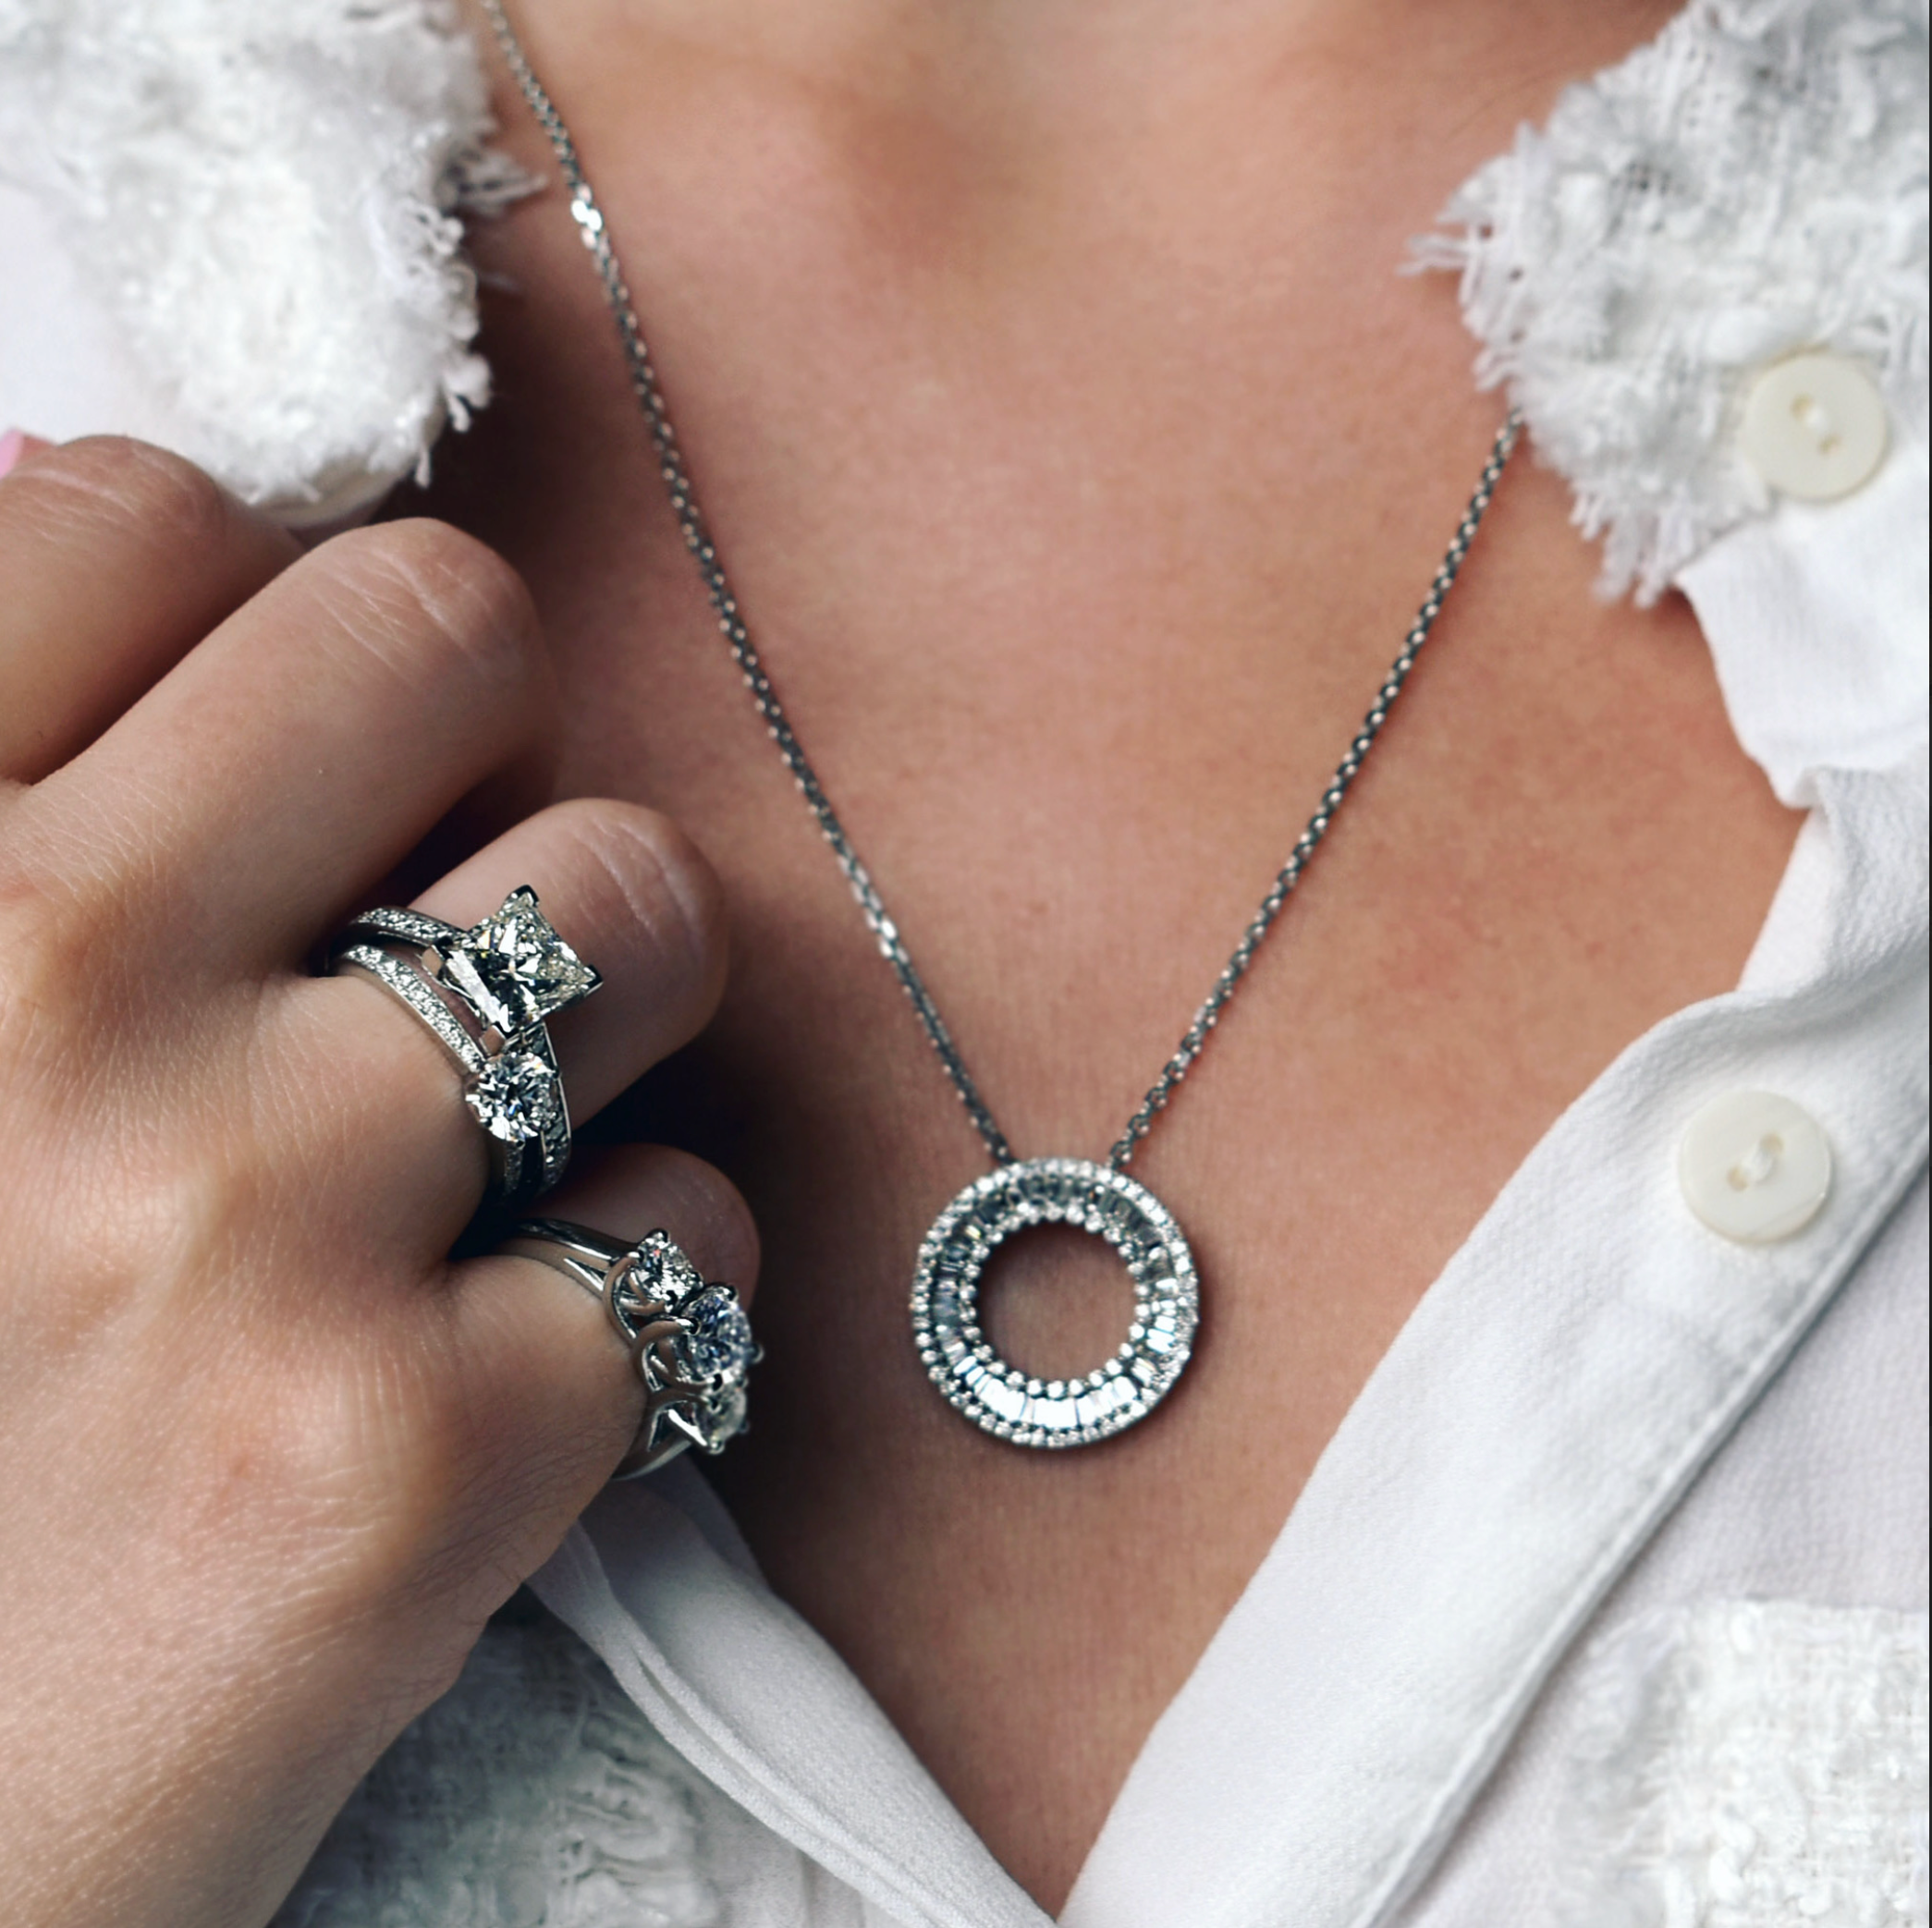 Baguette diamond pendant and engagement rings featuring a three stone design, round and princess cut stones in Dublin, London, Manchester, Ireland and the UK. Fine jewellery, engagement and wedding rings, Bridal luxury, Irish and British craftsmanship